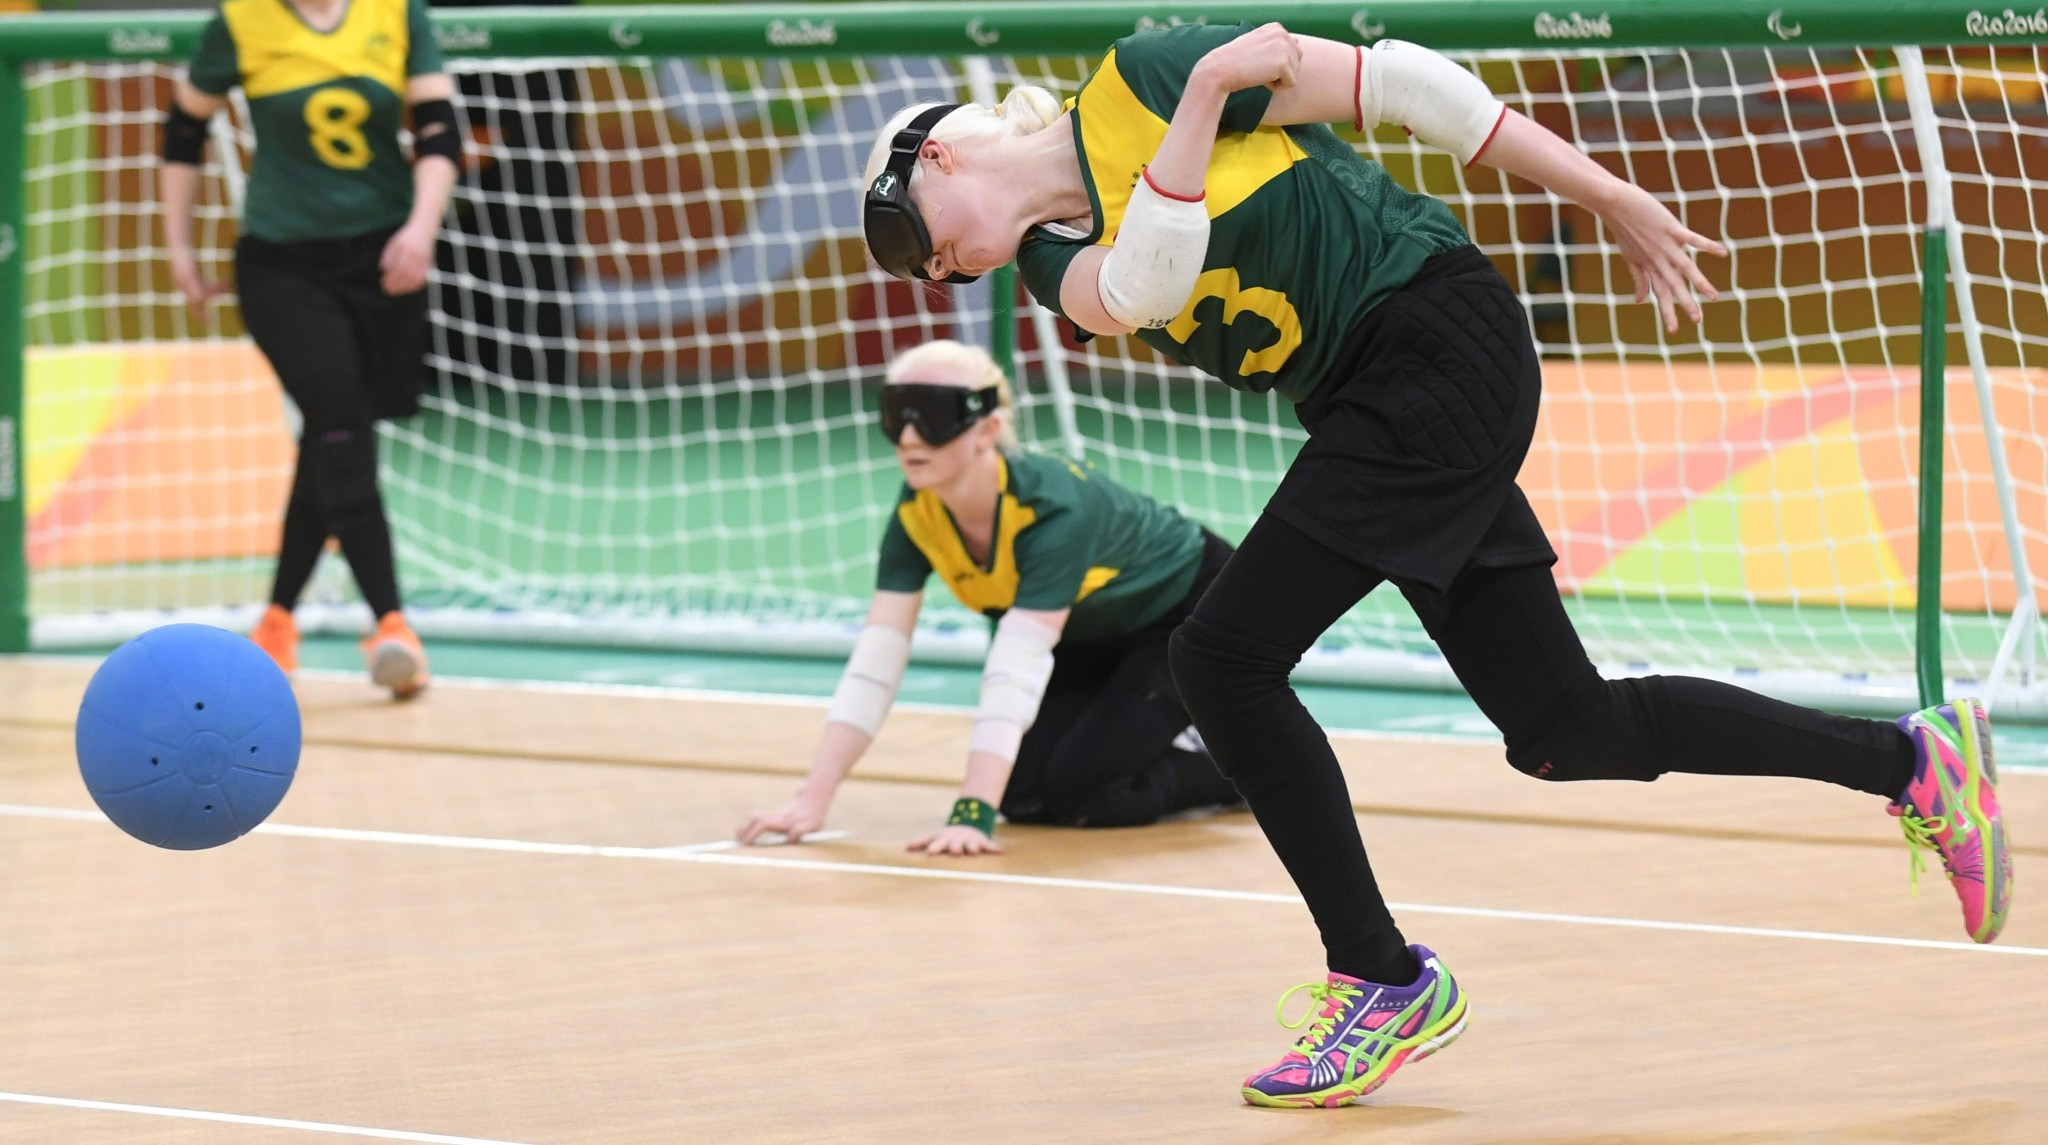 Australia goalball coach admits qualification for IBSA World Championships will be difficult